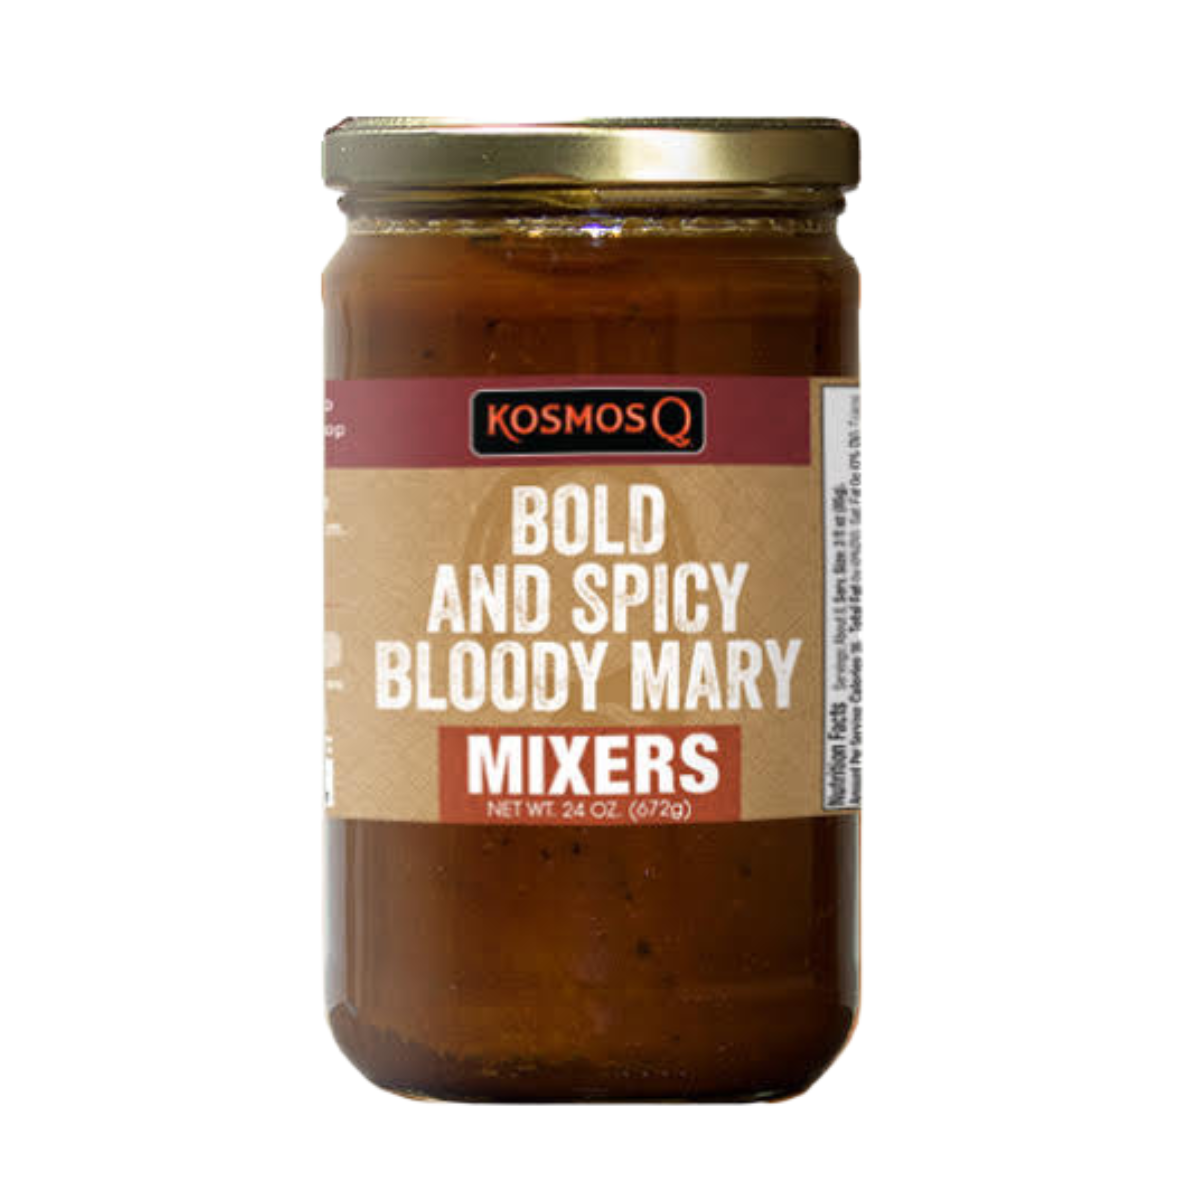 Kosmos Q BBQ Products & Supplies Bold and Spicy Bloody Mary Mix